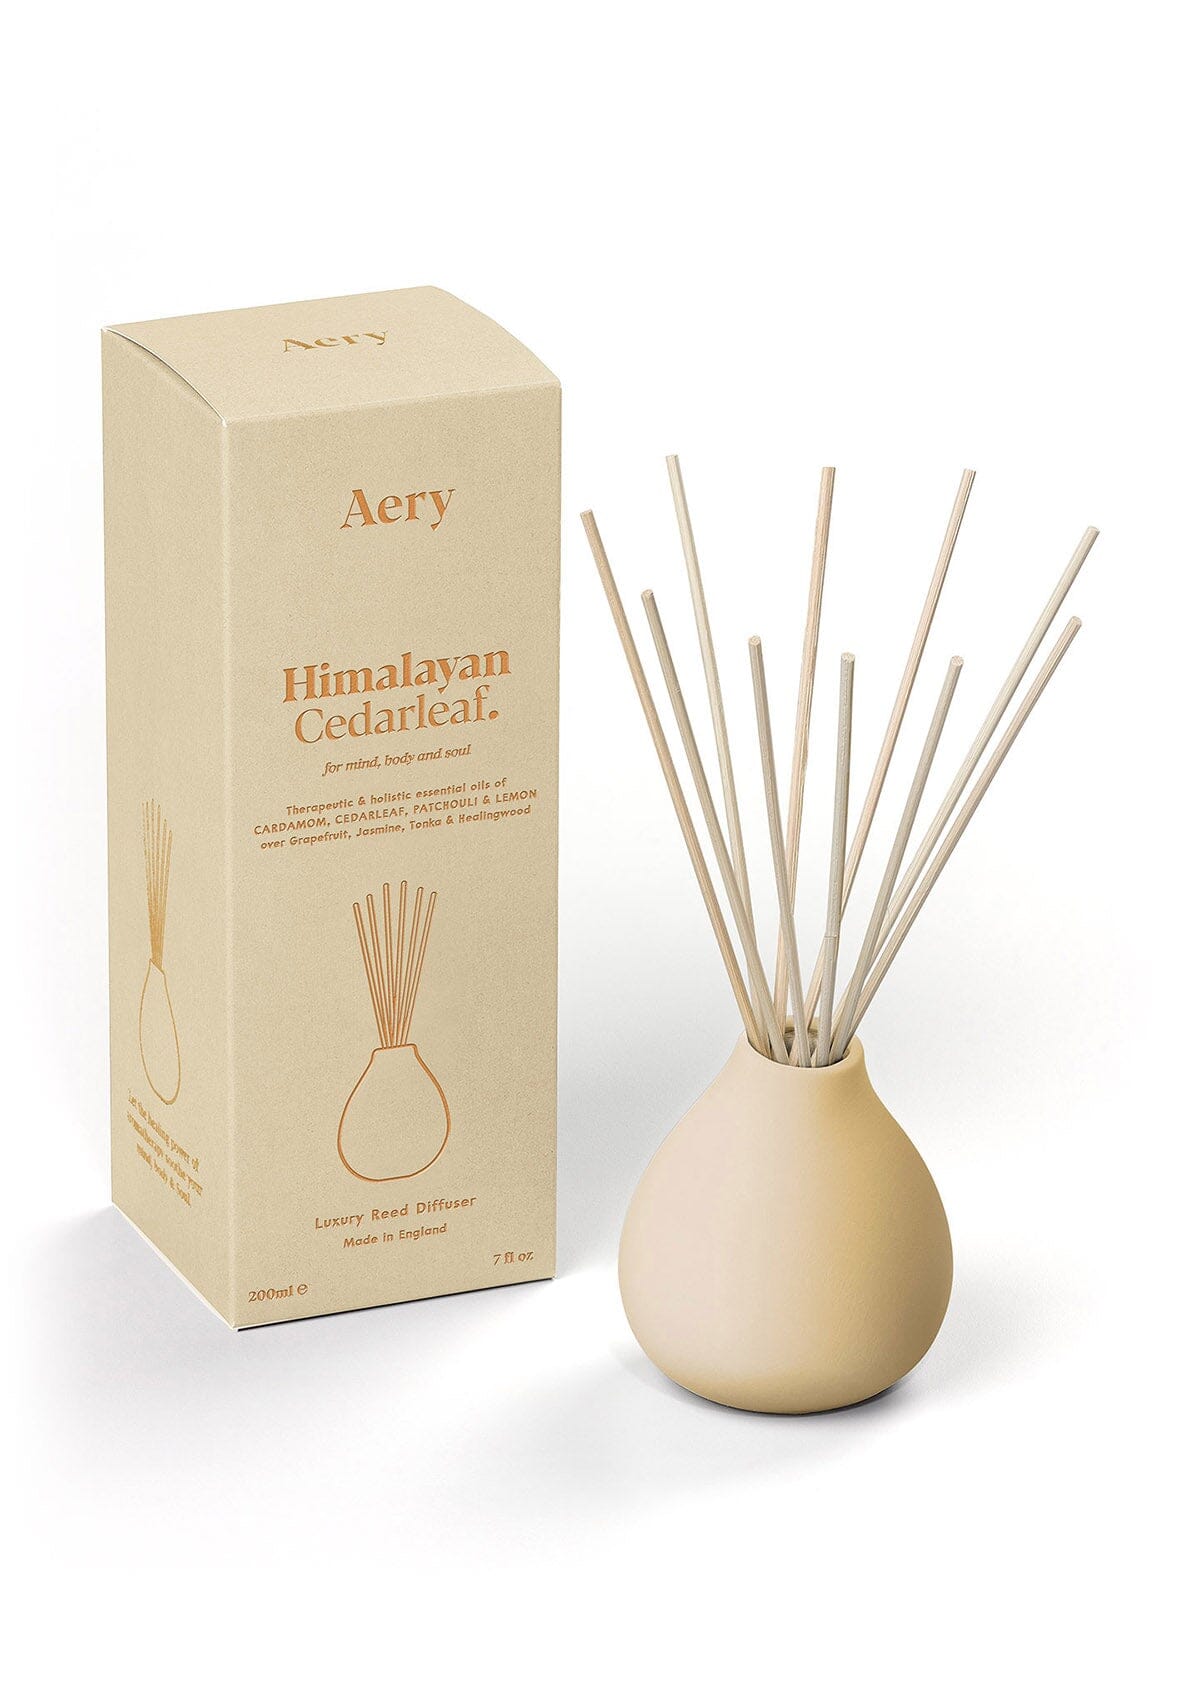 Cream Himalayan Cedarleaf diffuser with product packaging by Aery 